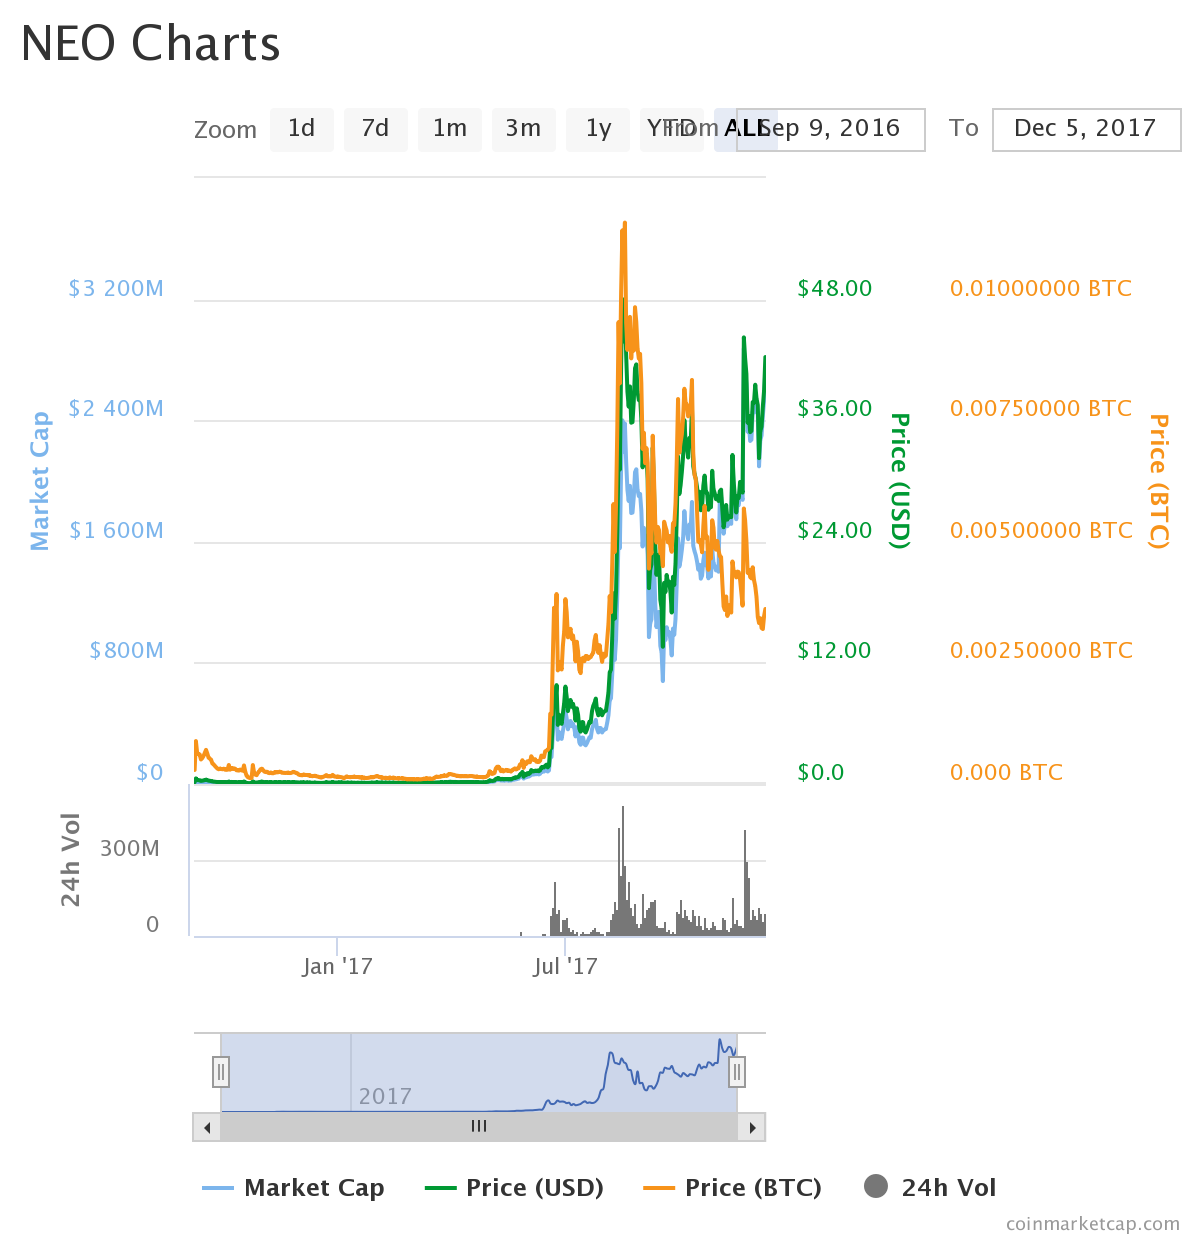 NEO Chart - Global Coin Report